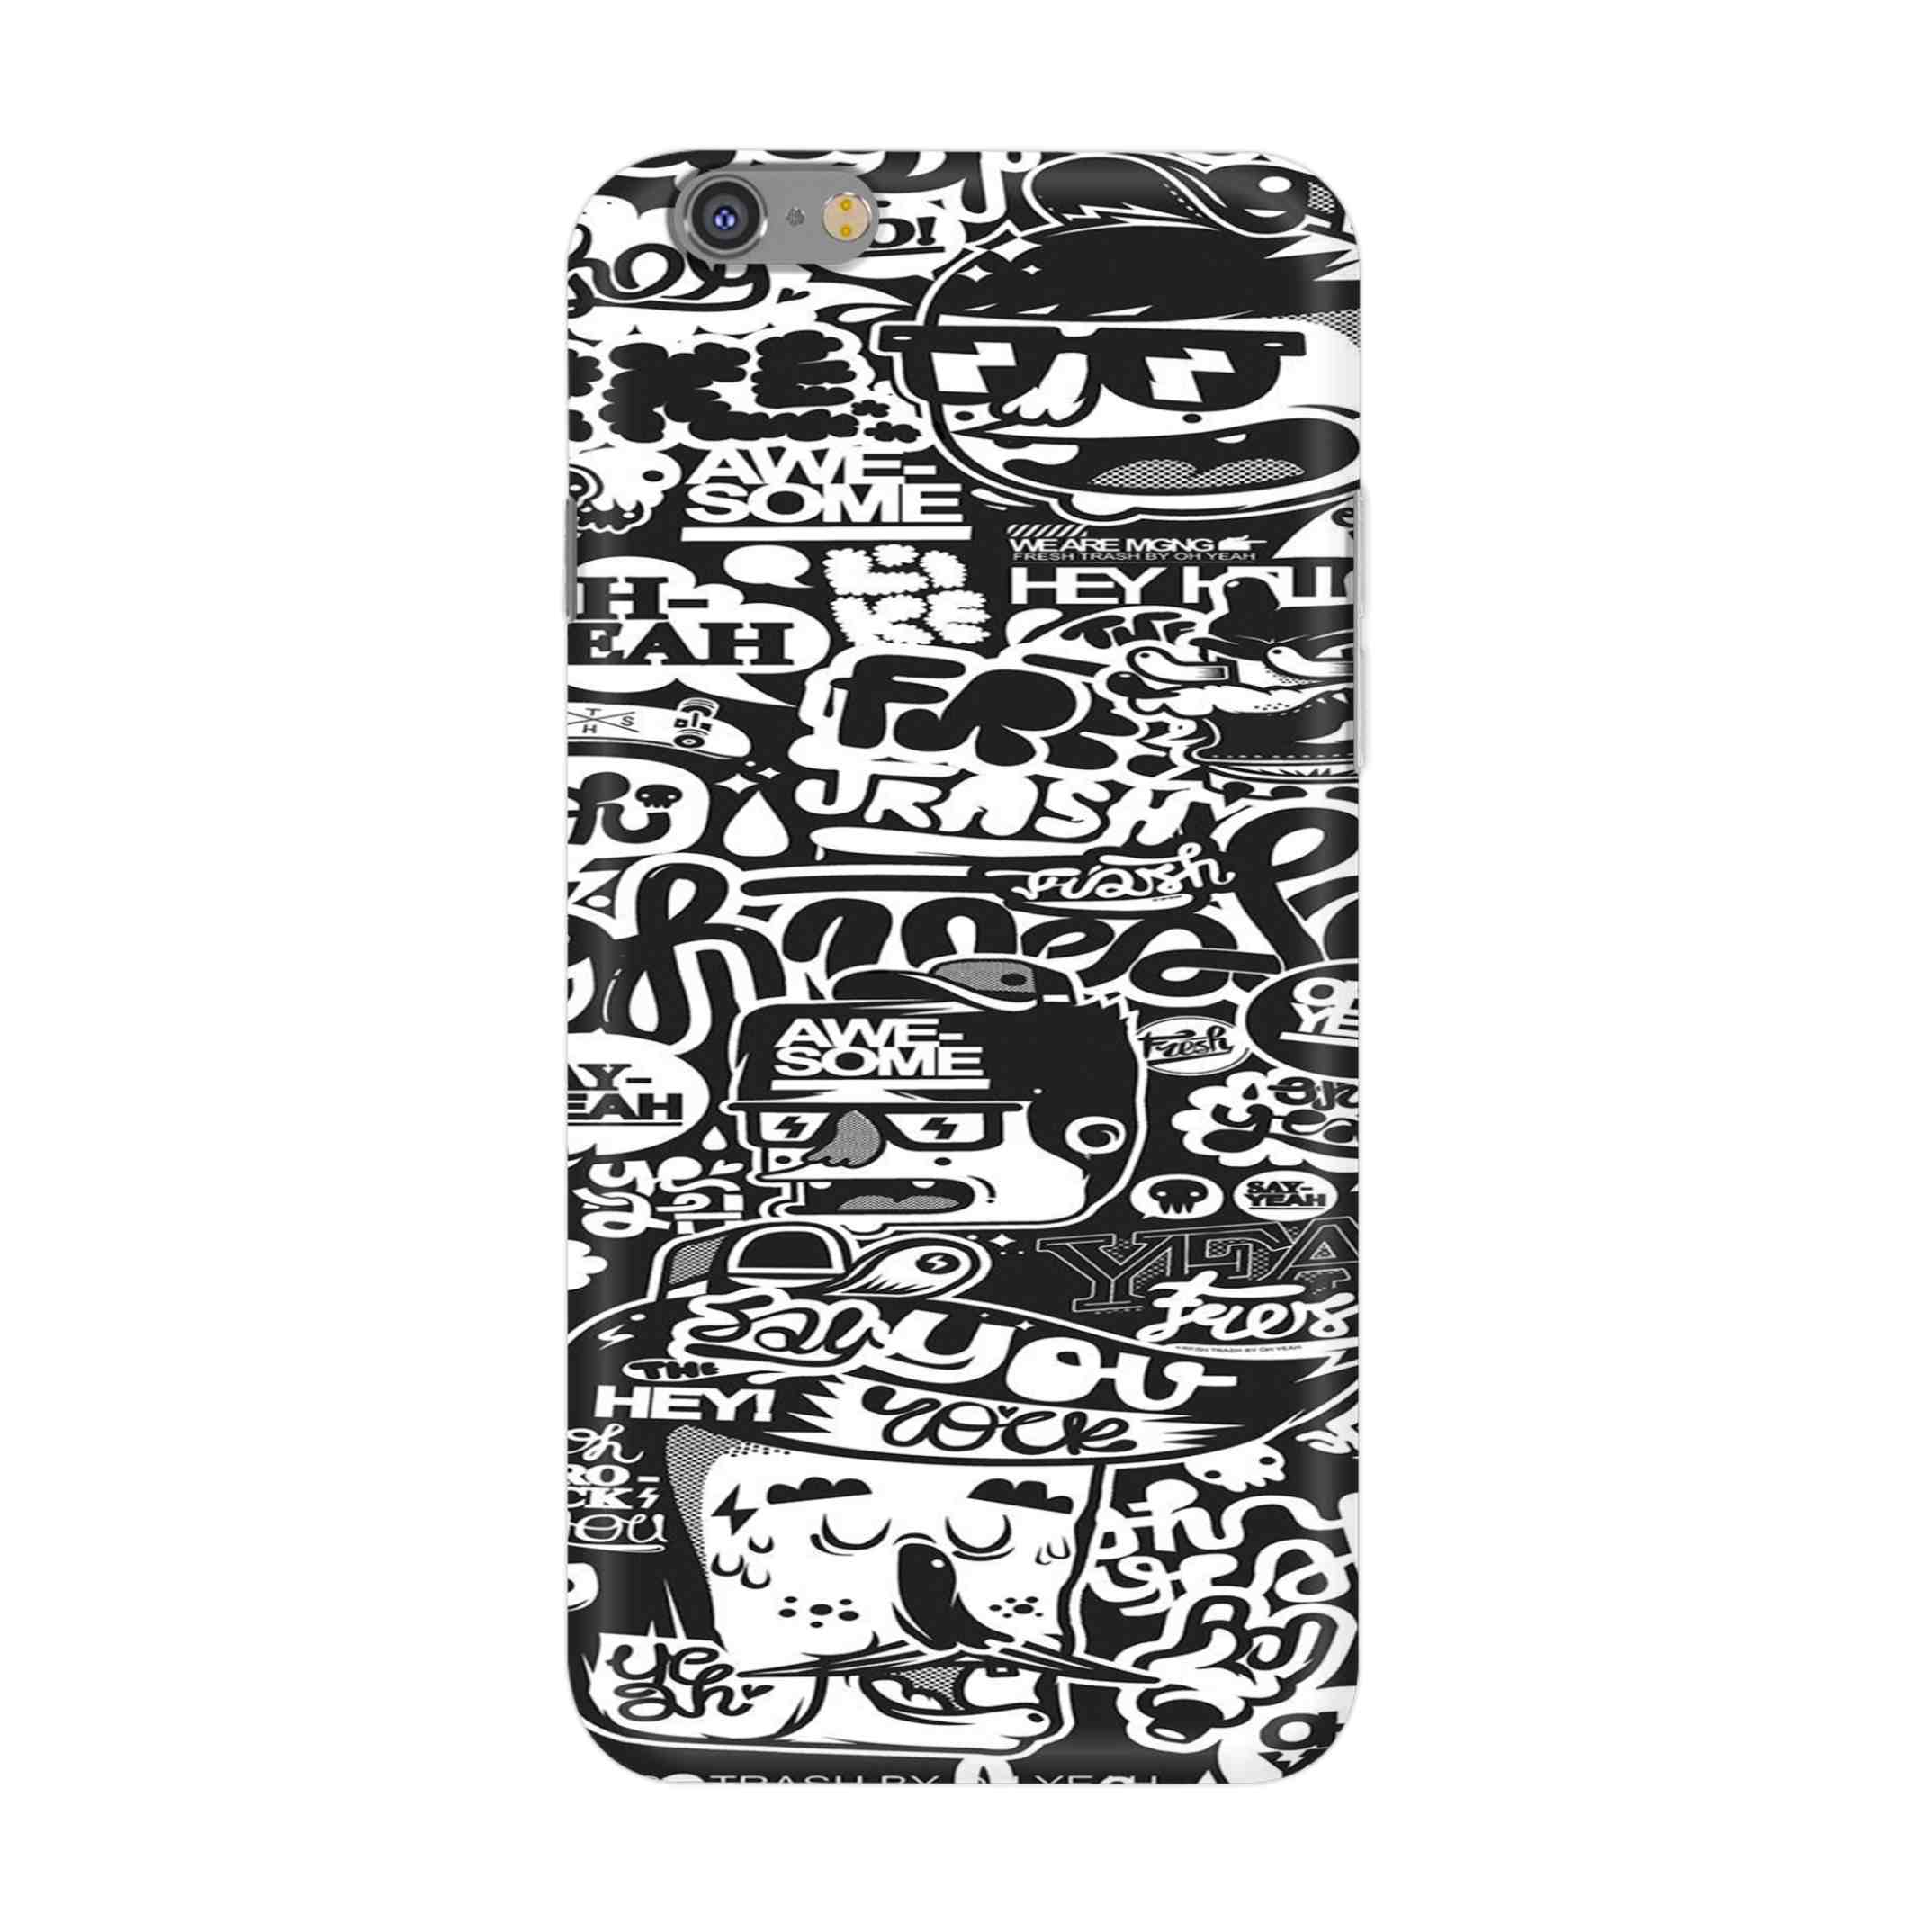 Buy Awesome Hard Back Mobile Phone Case/Cover For iPhone 6 Plus / 6s Plus Online